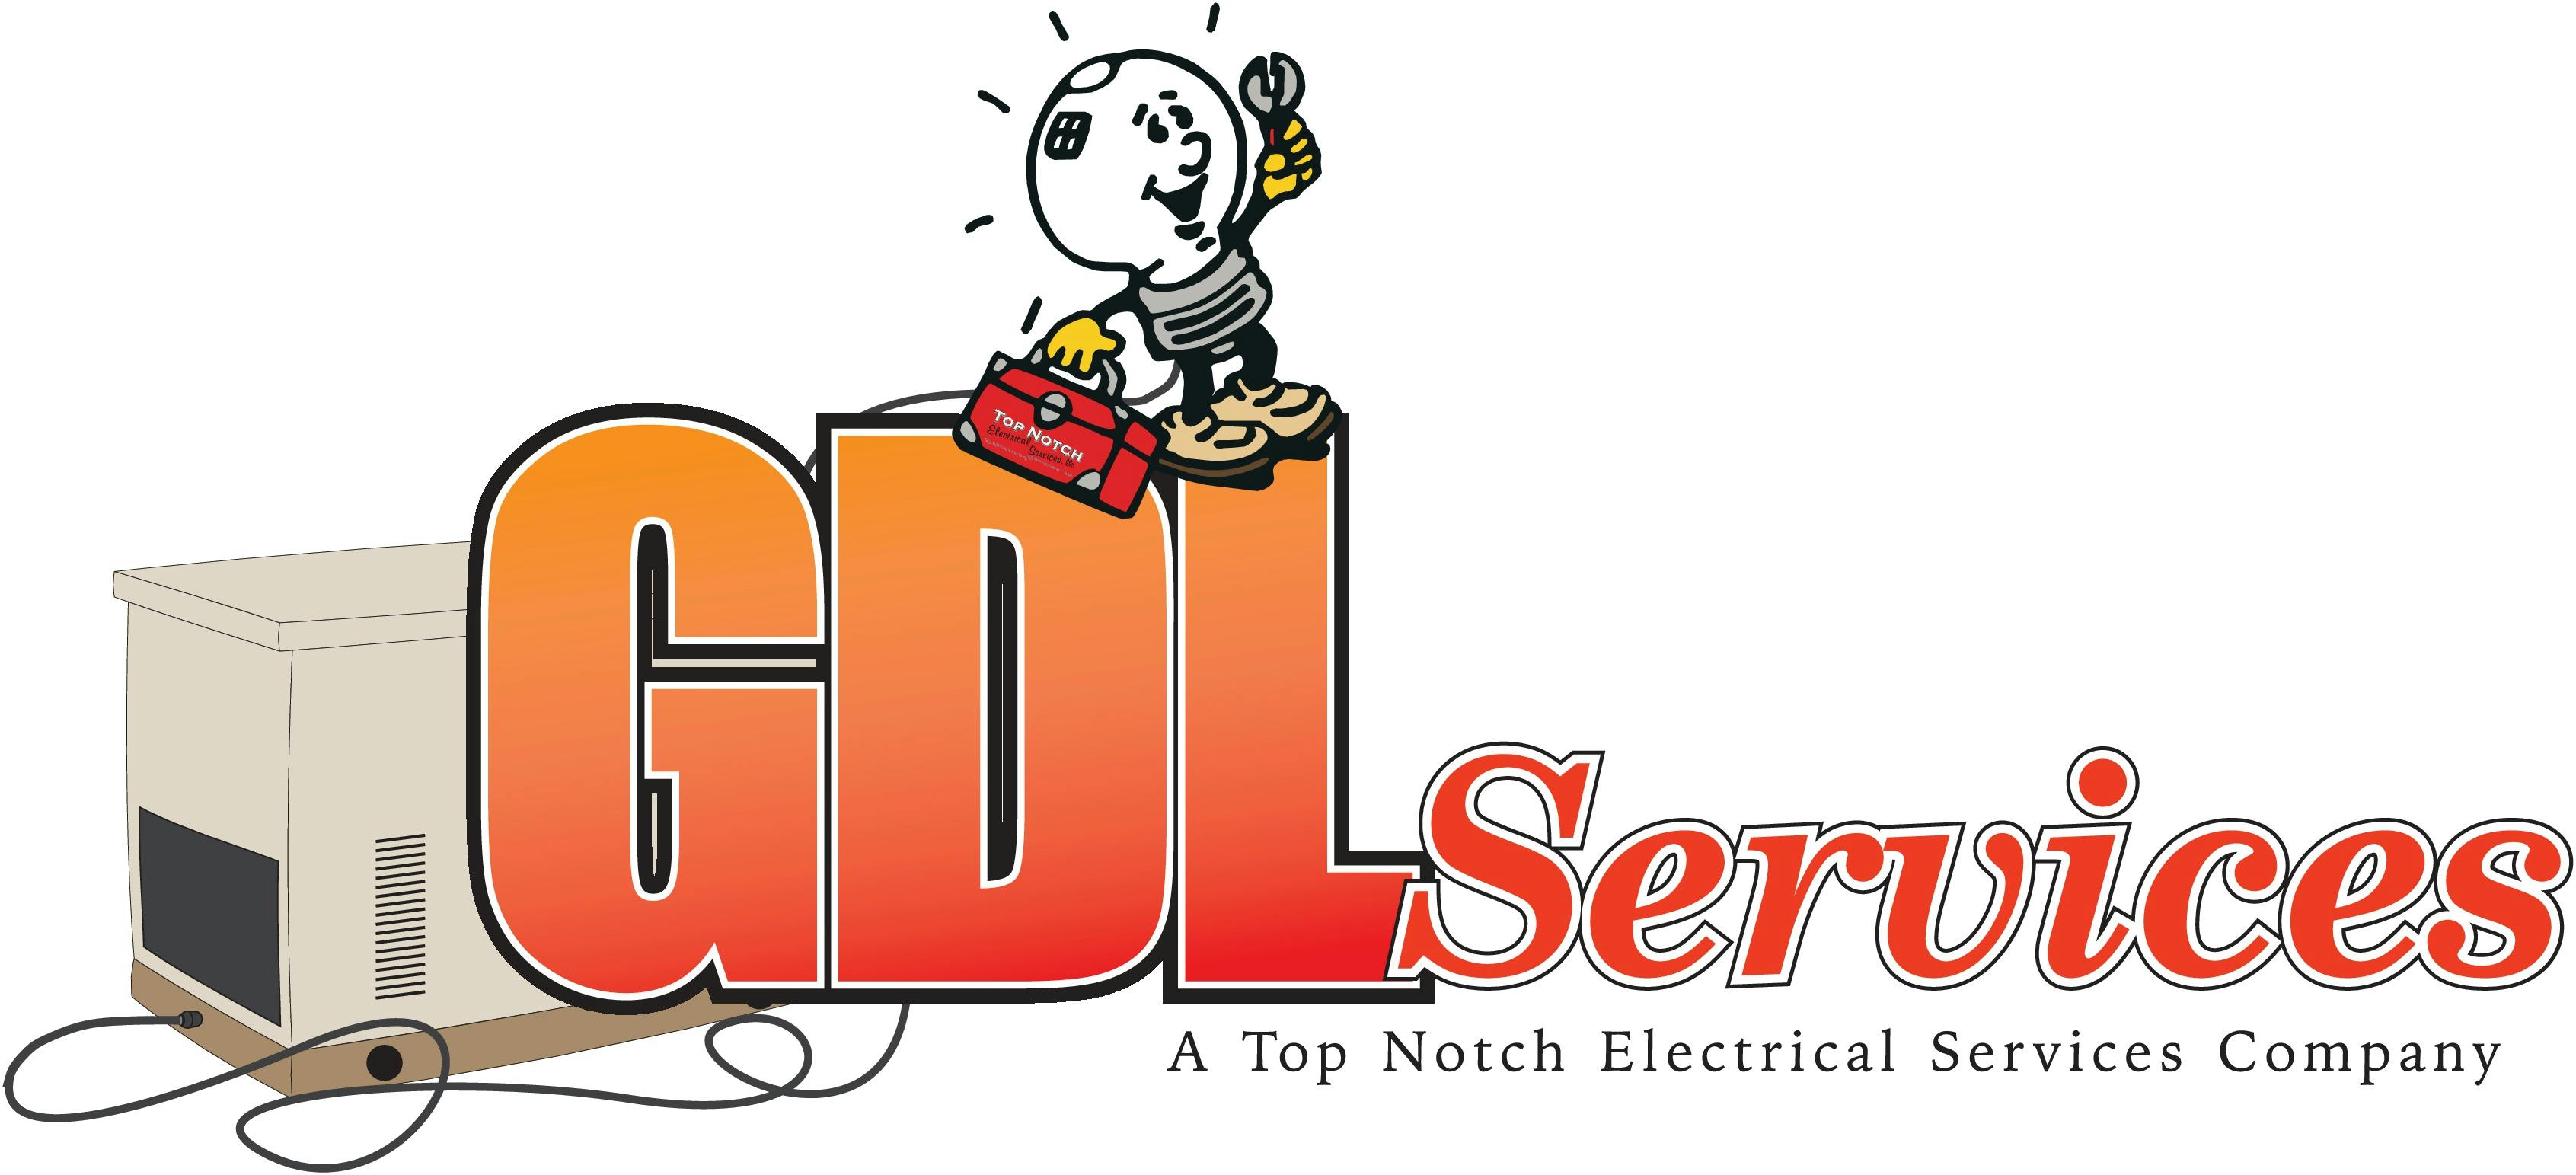 Company logo for 'GDL Services LLC'.